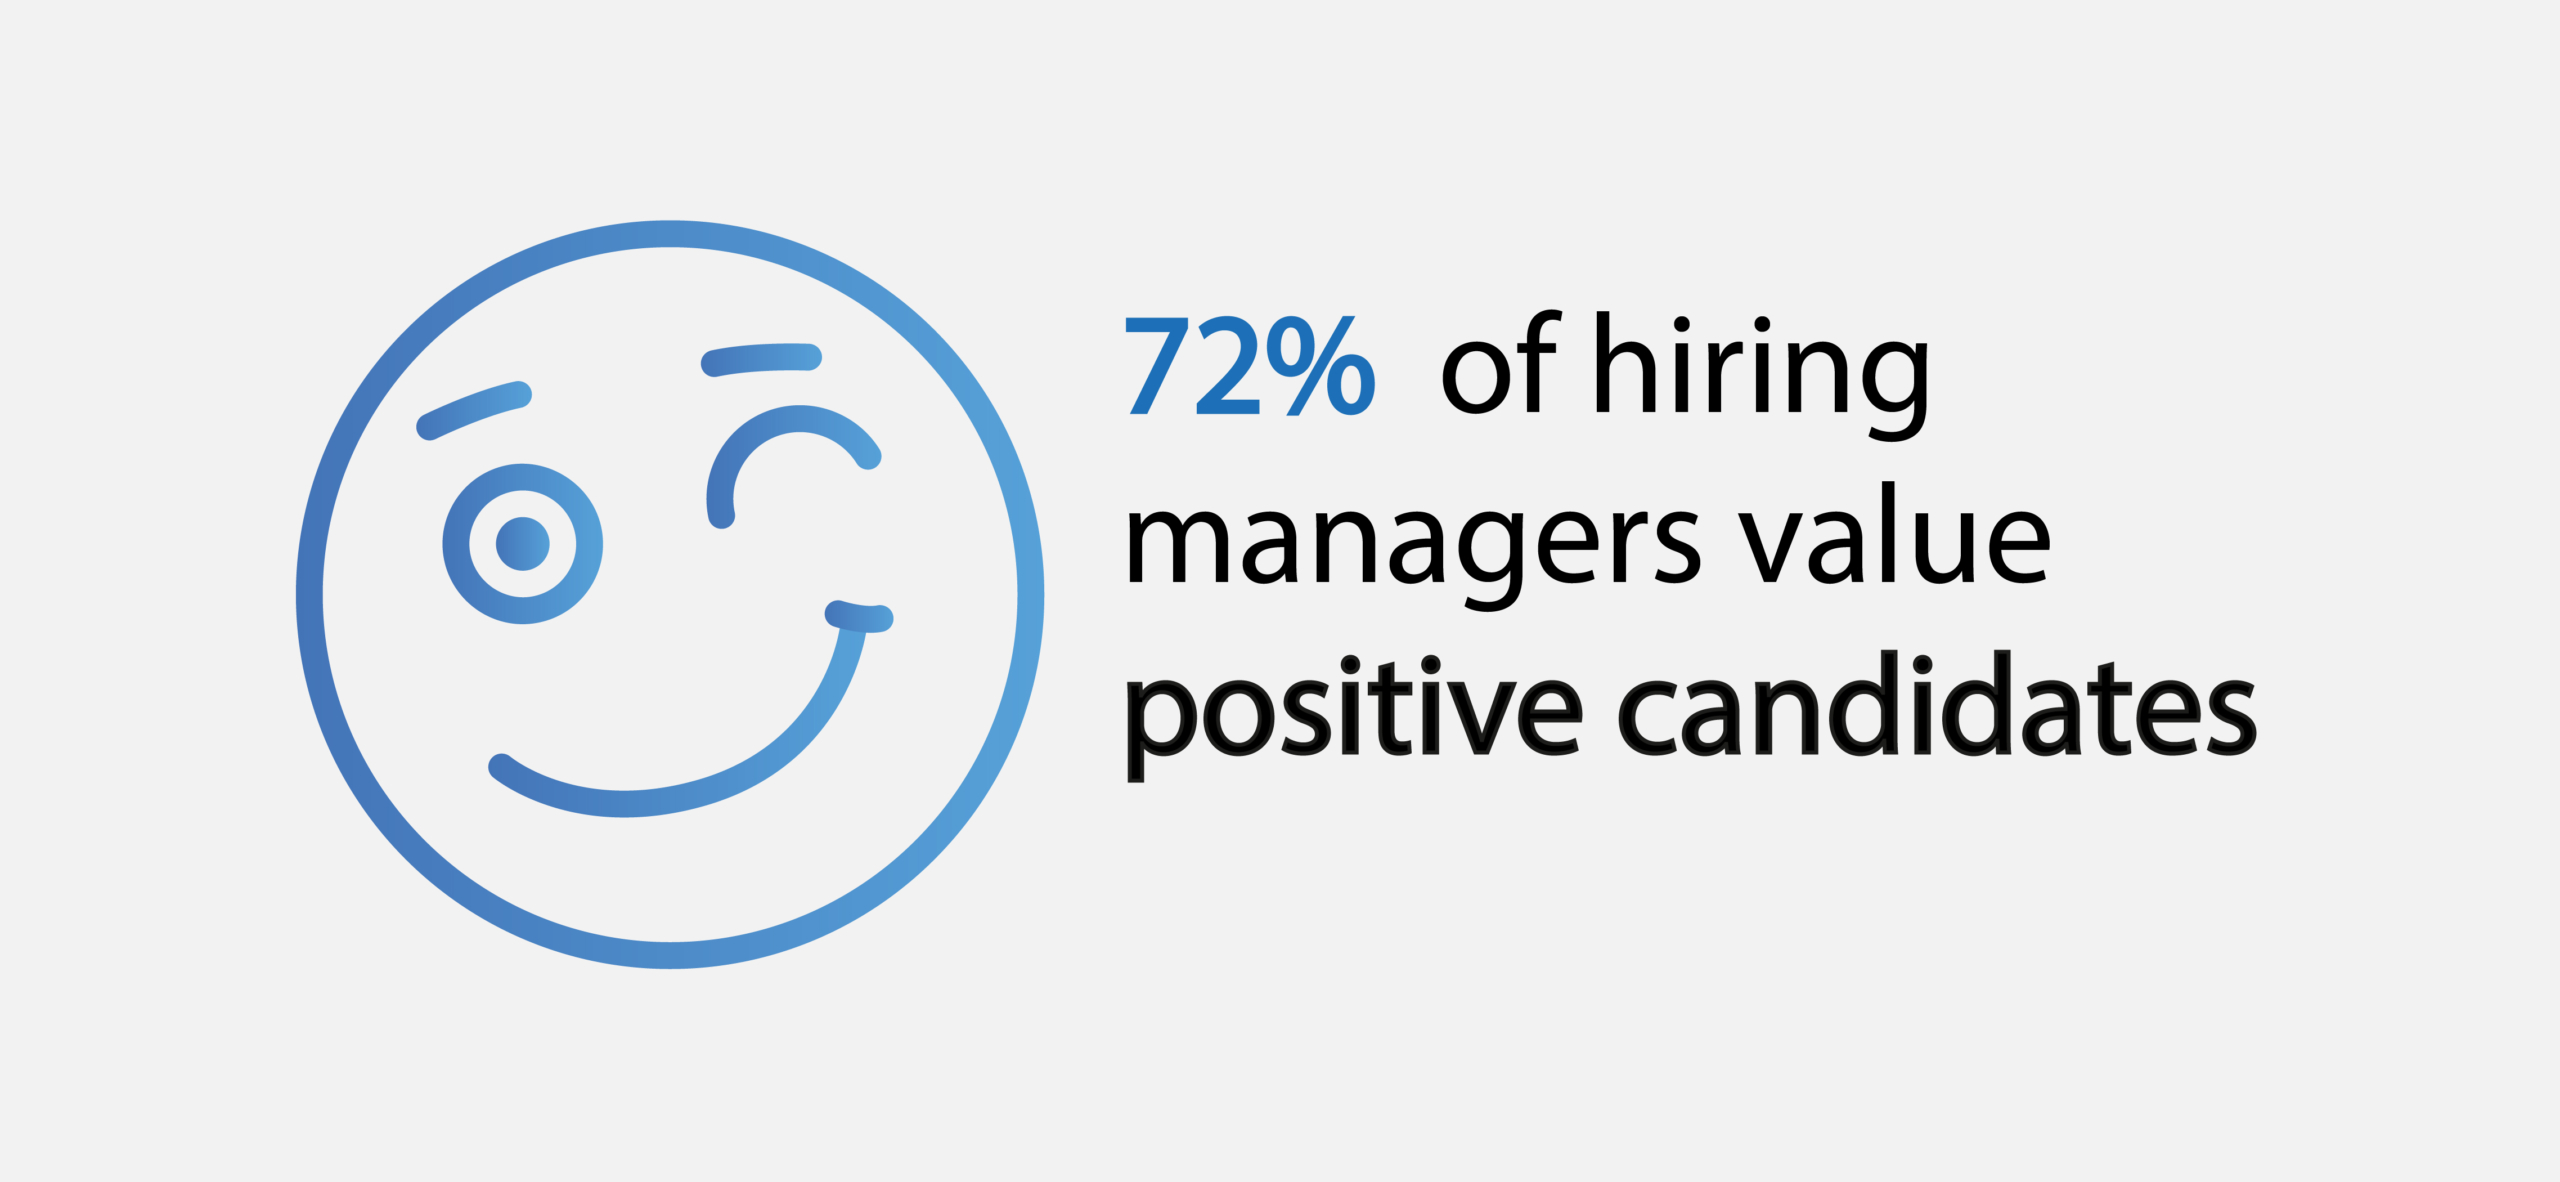 72% of hiring managers value positive candidates